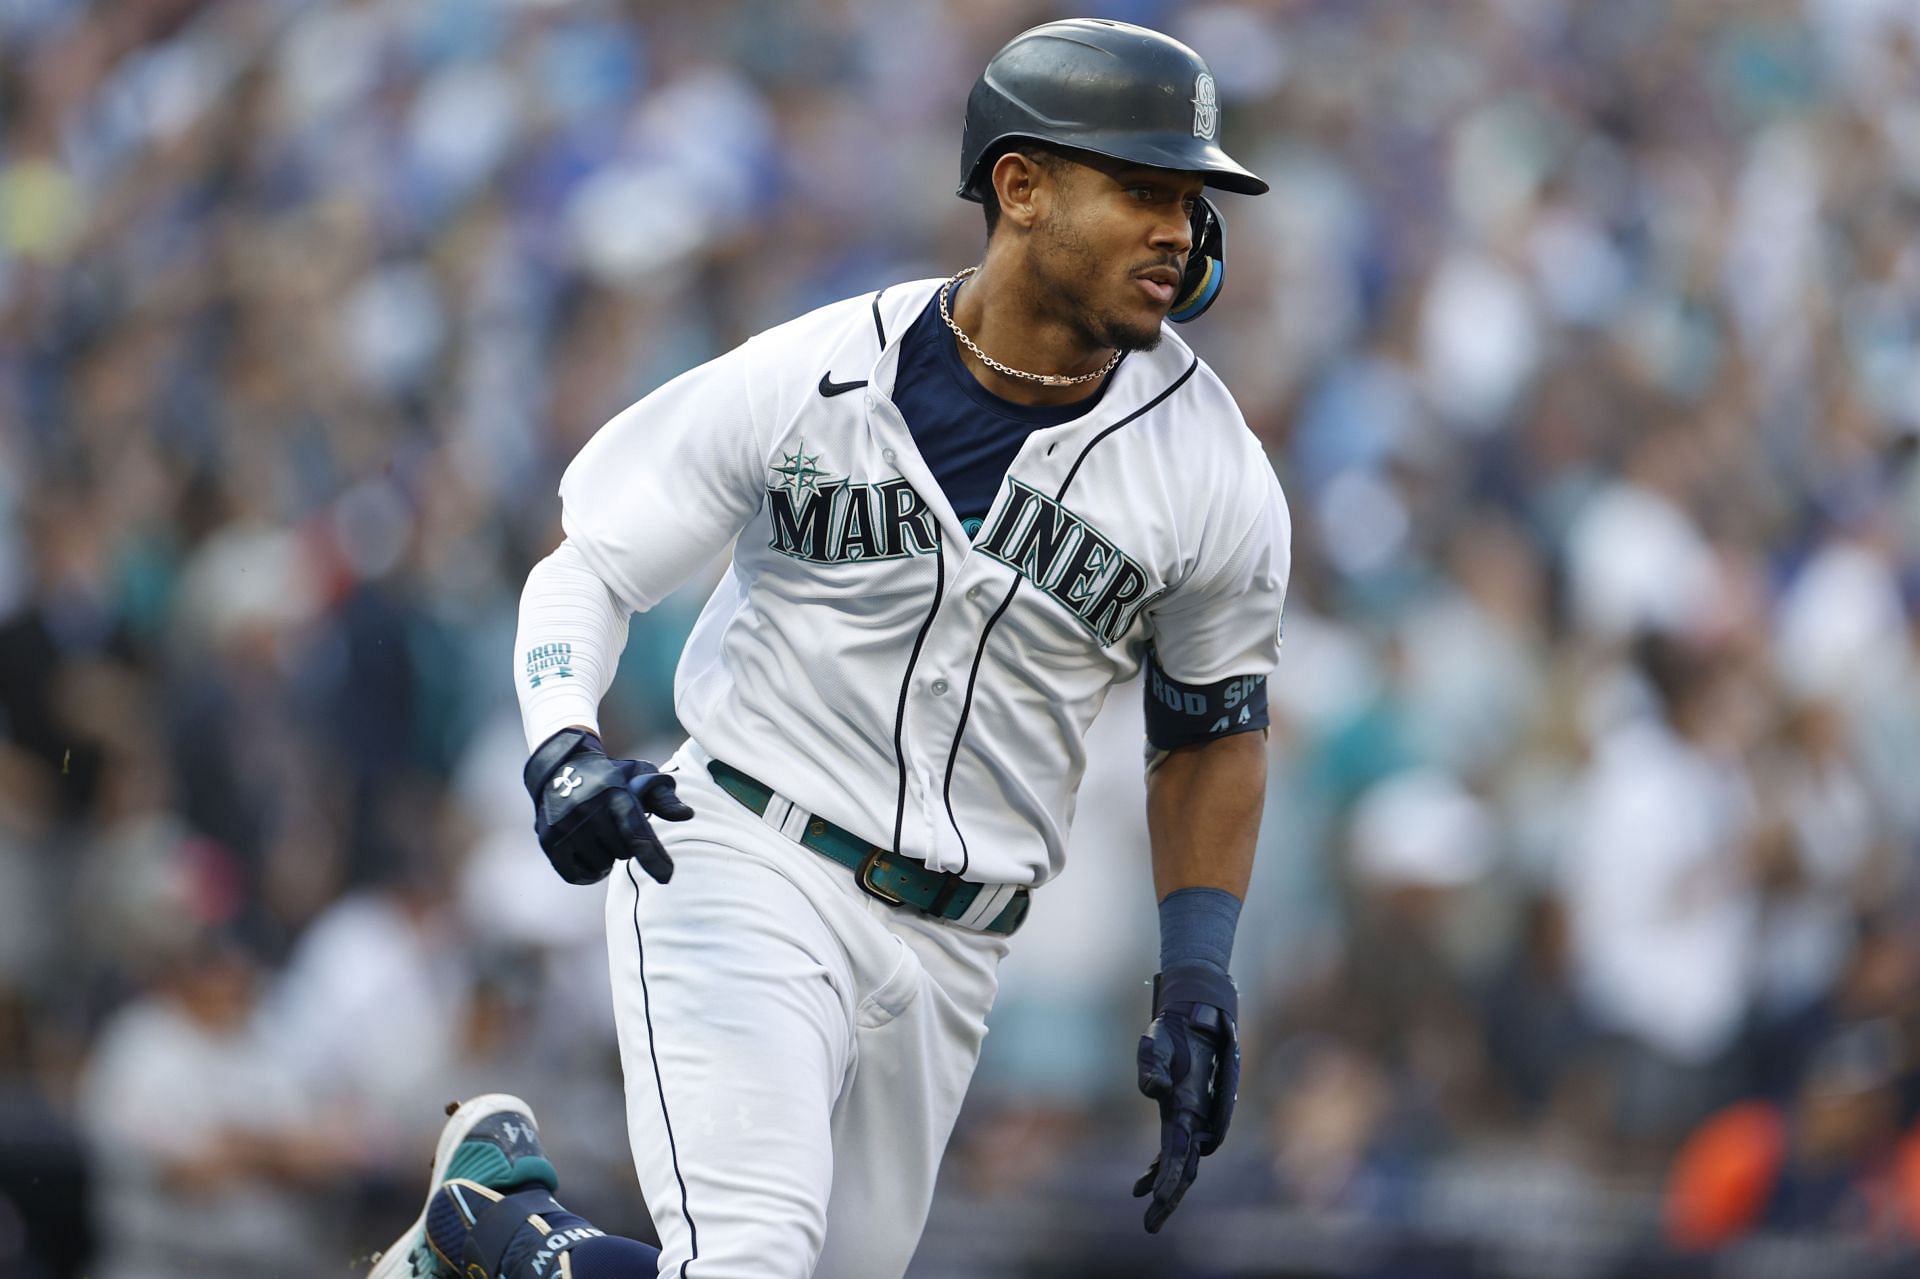 Mariners' rookie Julio Rodríguez is heading to the 2022 MLB All